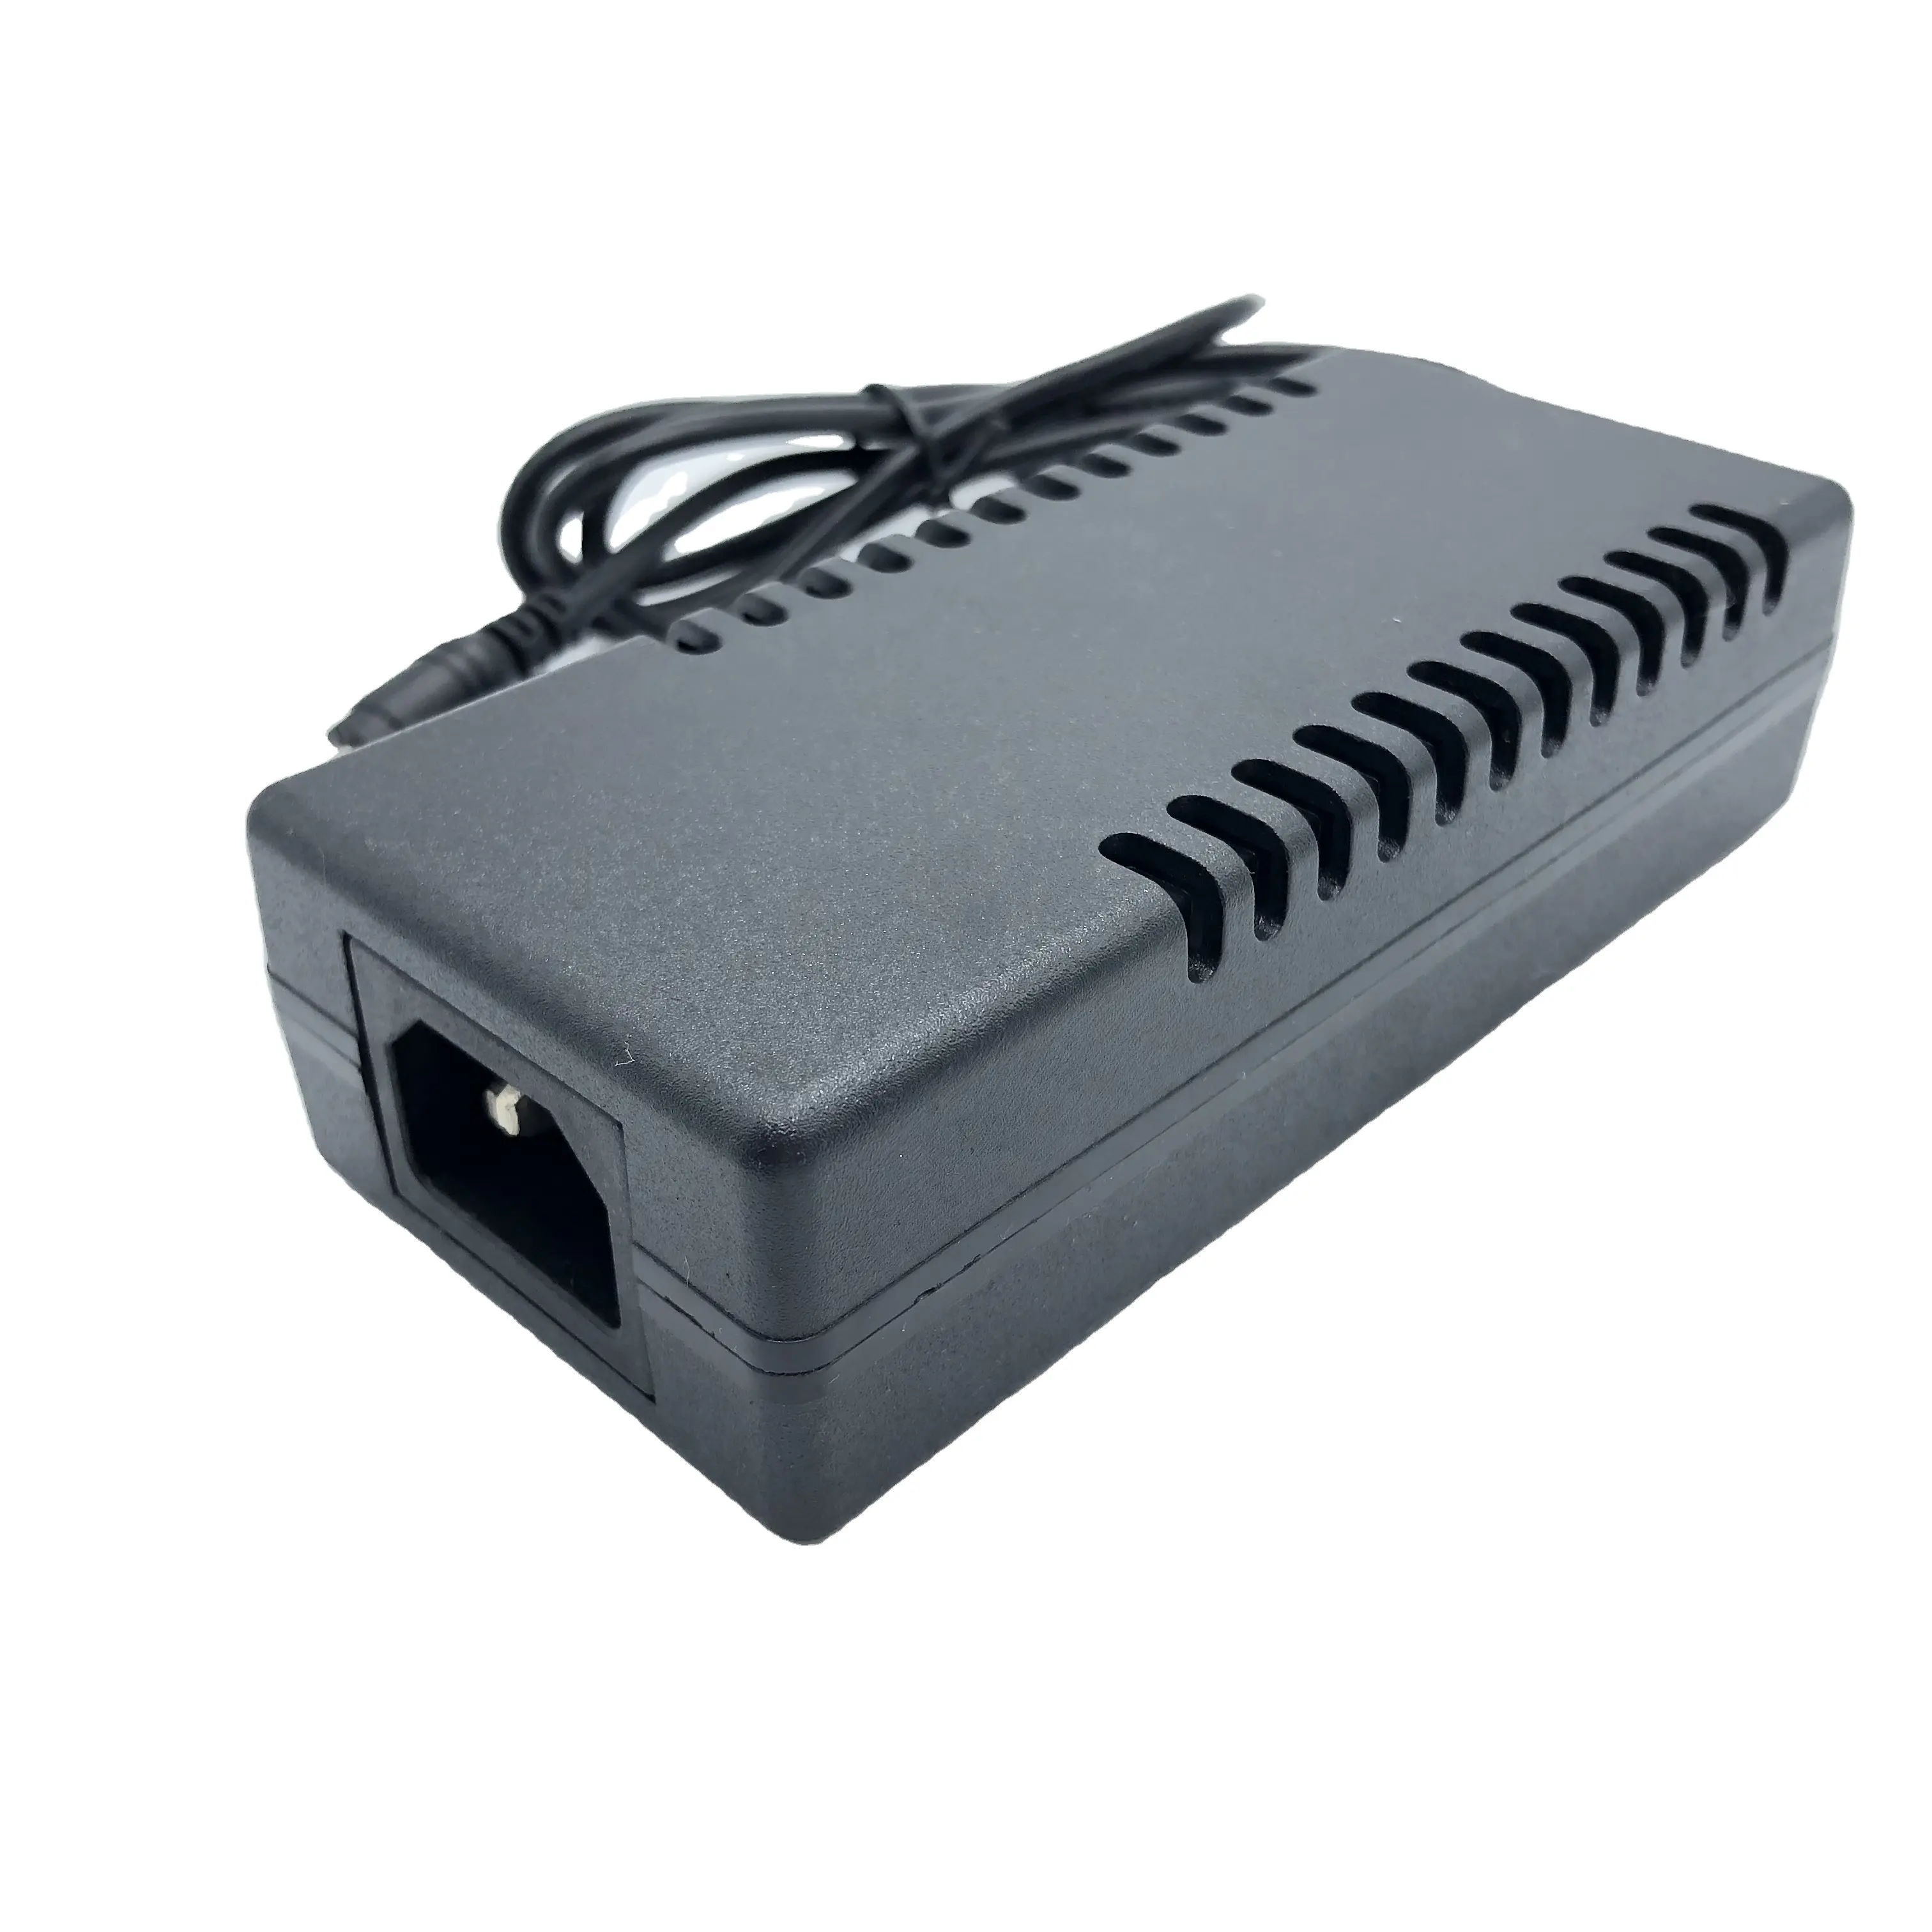 5v 6v 4a dc power supply for led light boxes ul adapter 5v4a adapter changeable type power adapter 5volt dc 4a